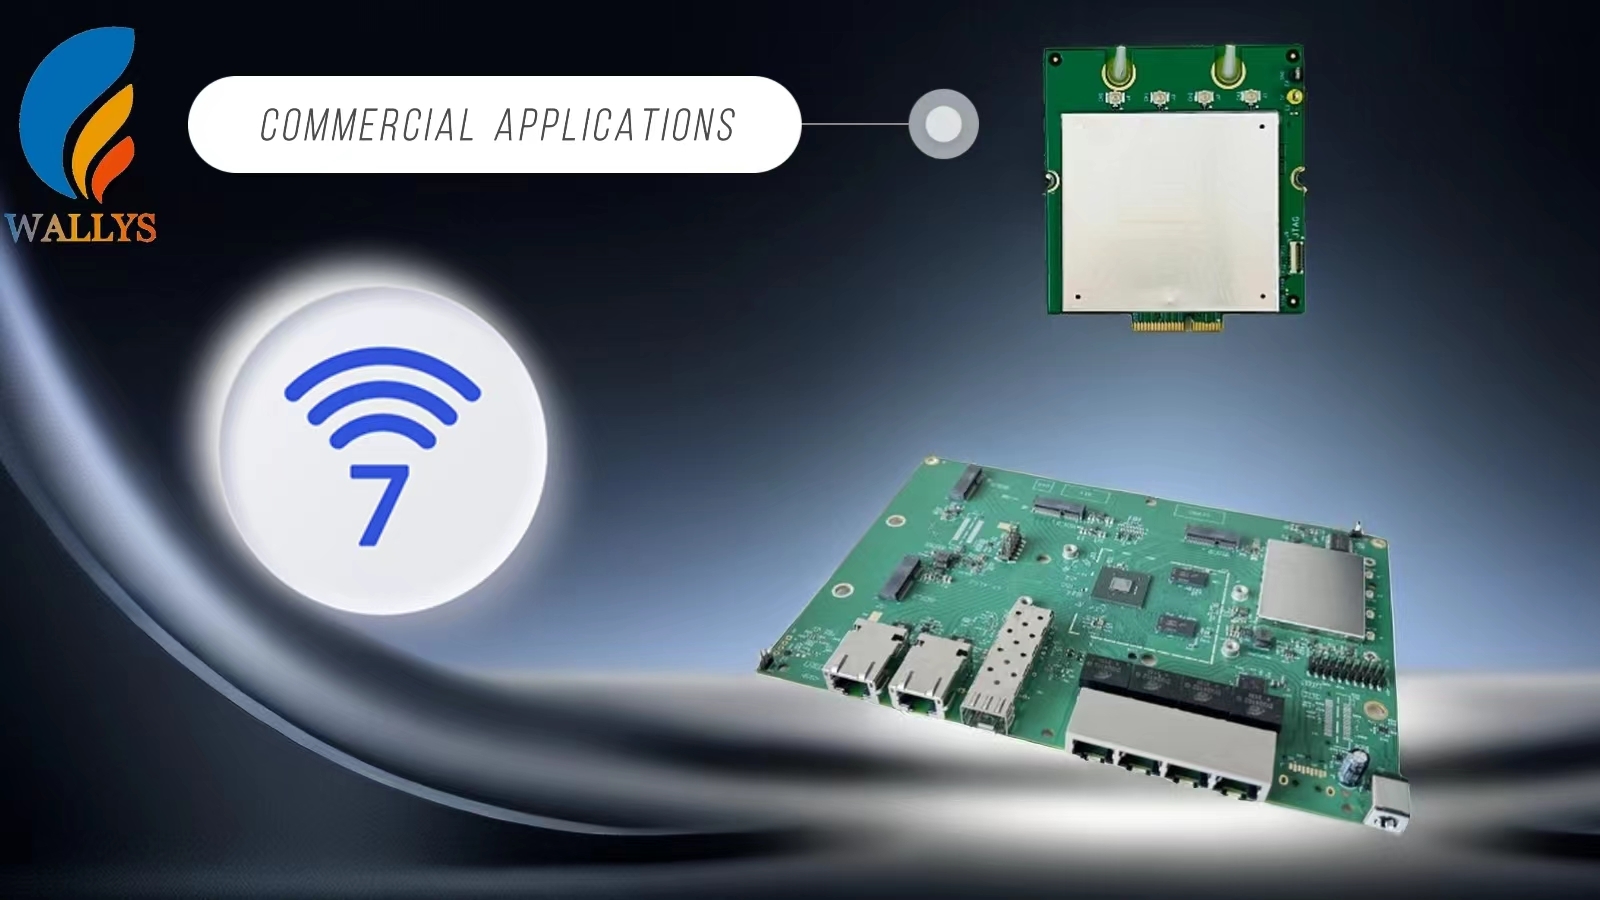 IPQ9554 with QCN6274 Solution forCommercial Applications|Wi-Fi7